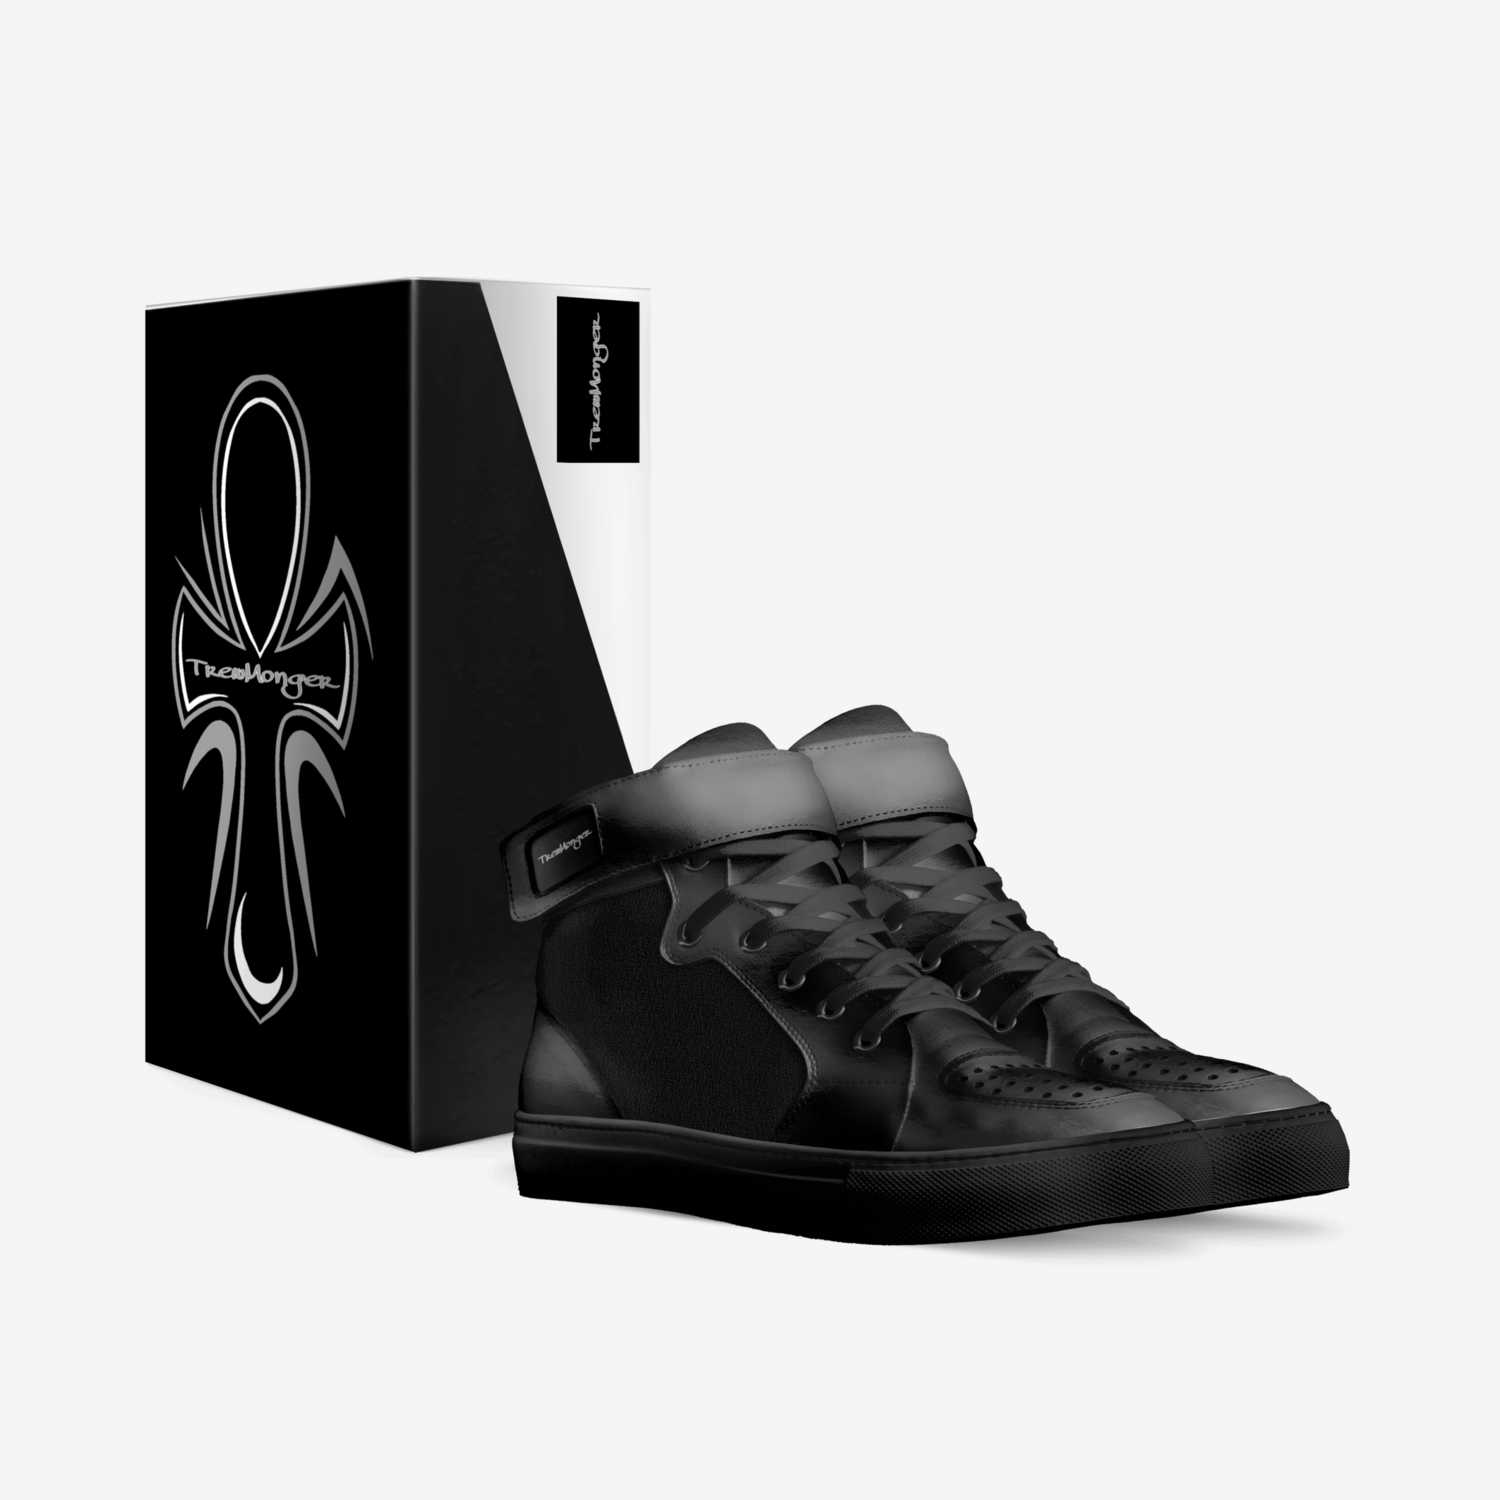 Black love custom made in Italy shoes by TrewMonger Brand | Box view